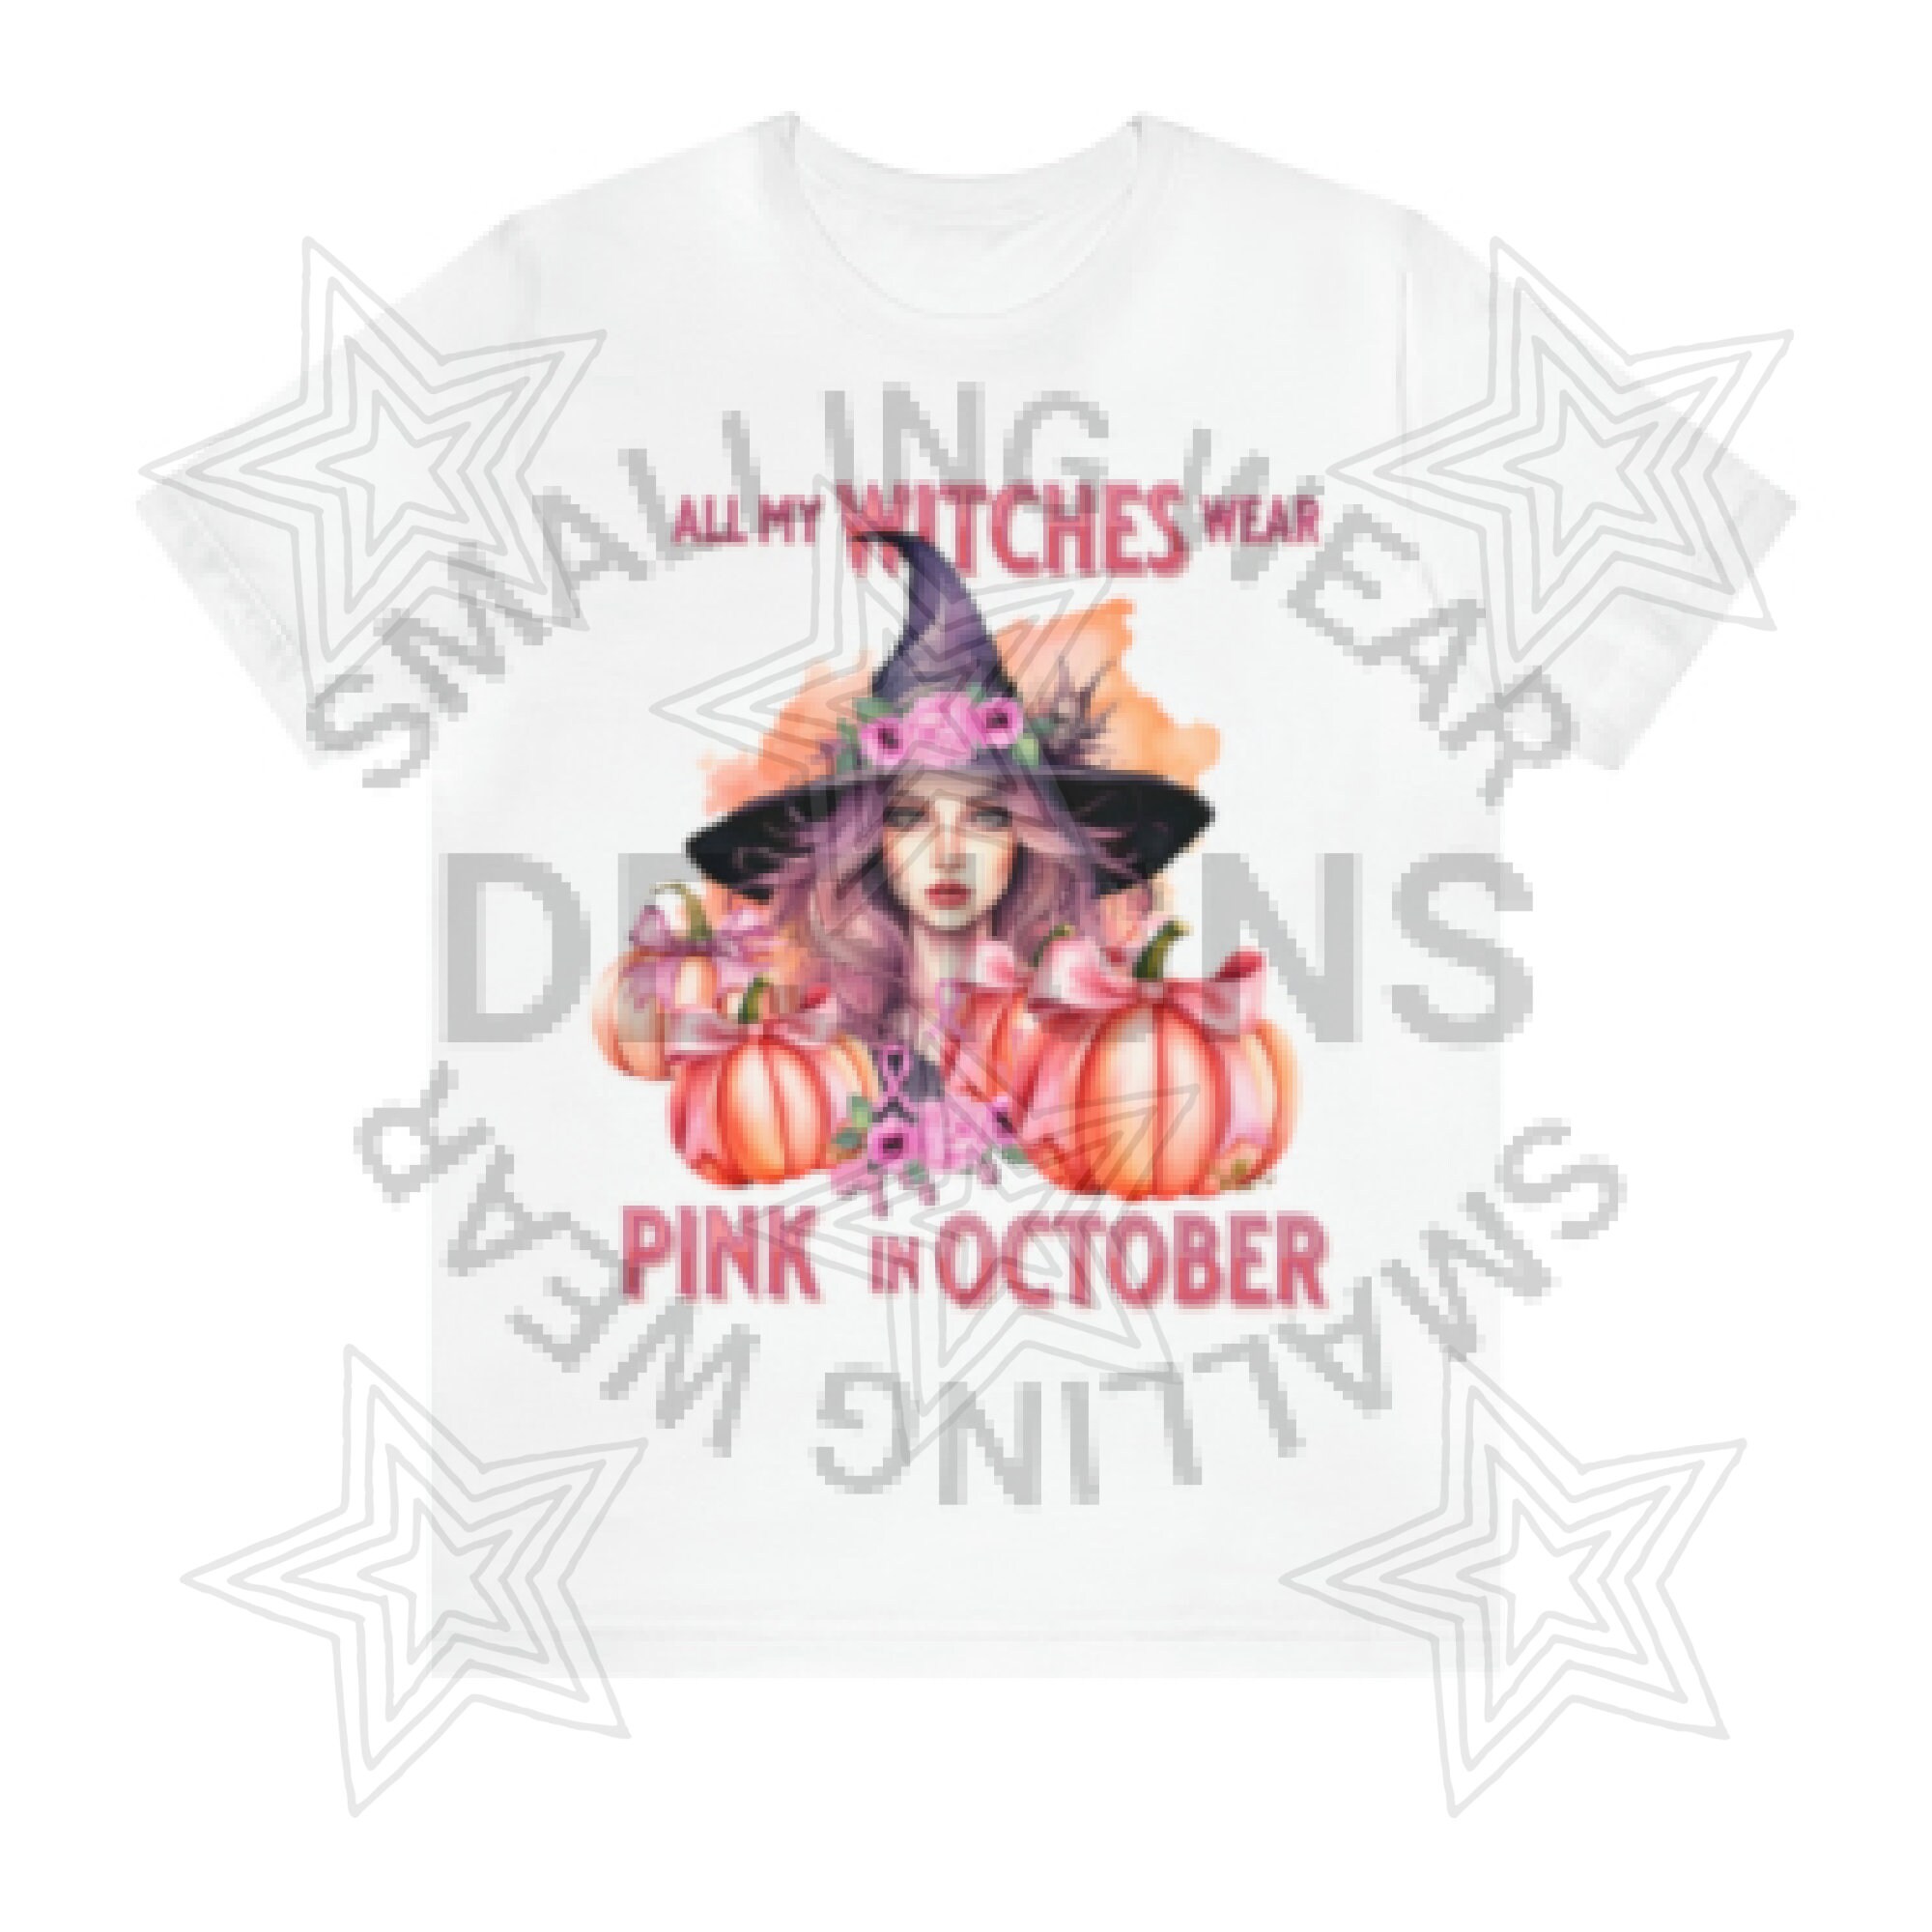 Discover Pink Ribbon Breast Cancer Tshirt, All my Witches ,tshirt wear pink in October Shirts Unisex Jersey Short Sleeve Tee